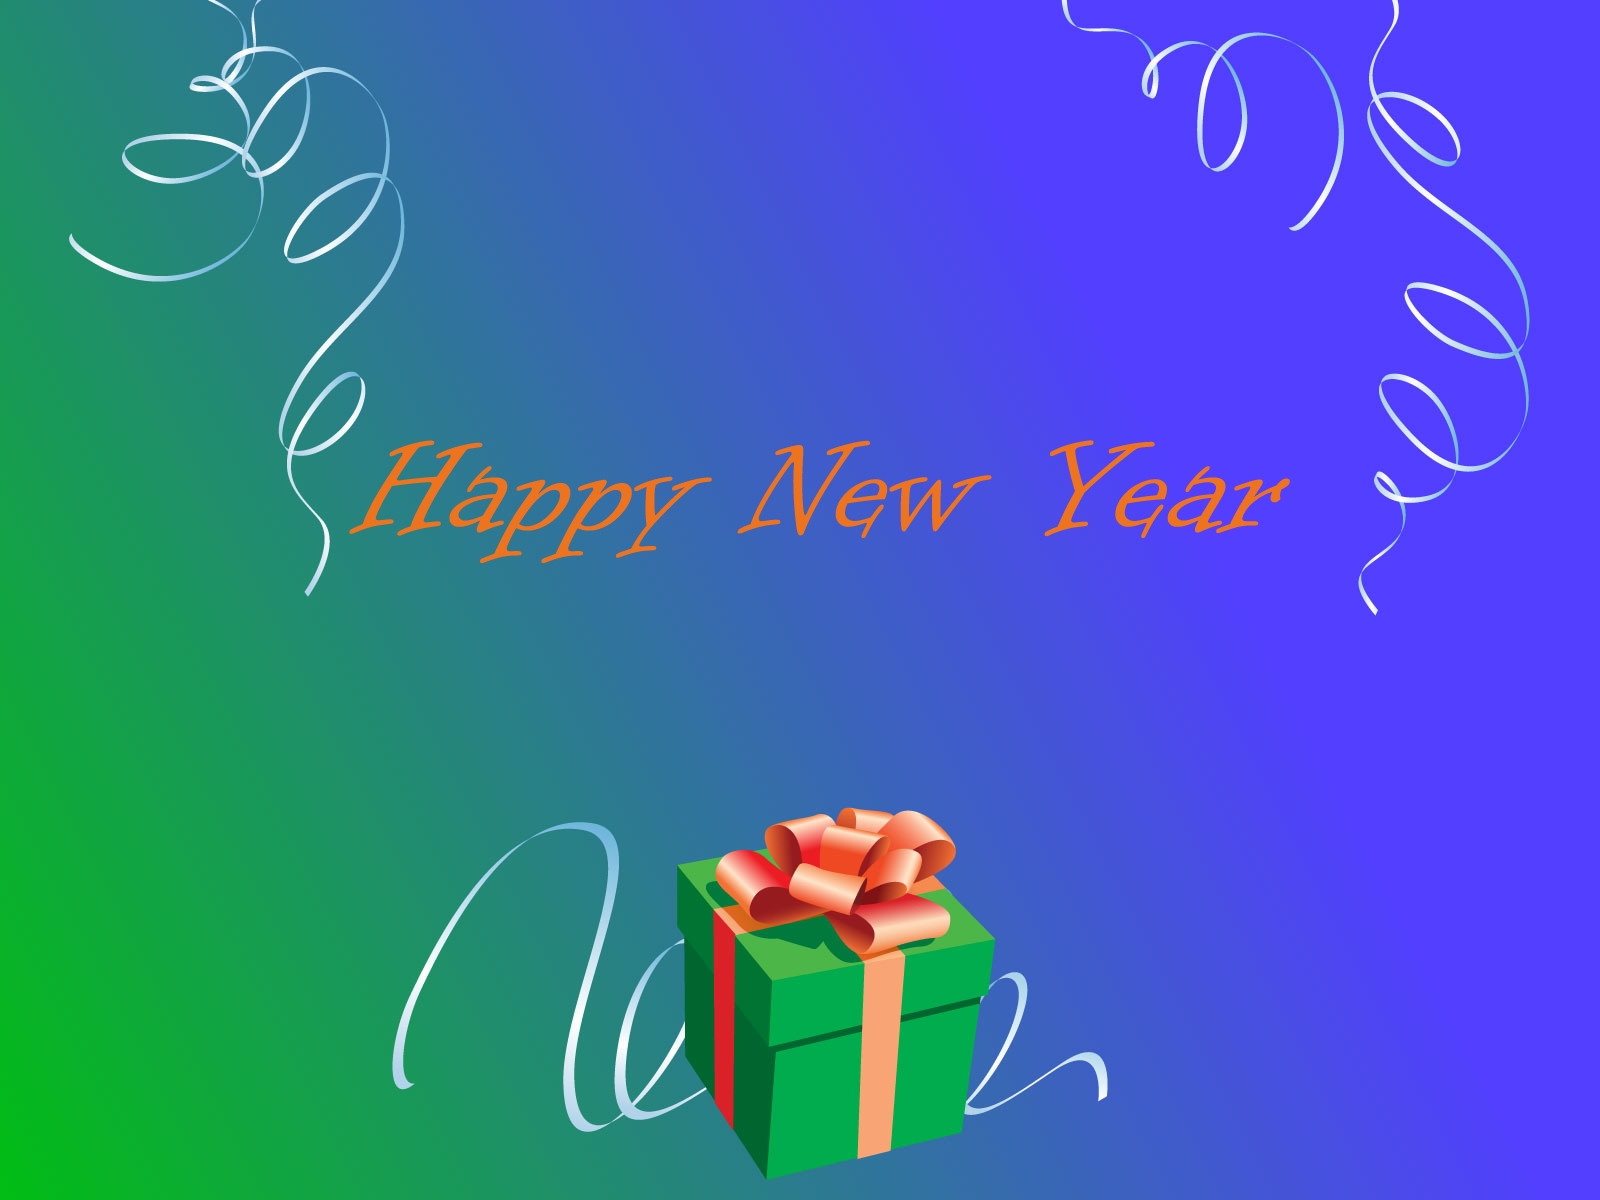 wallpaper proslut: Most Beautiful Happy New Year Wishes Greetings Cards Wallpaper 2013 004